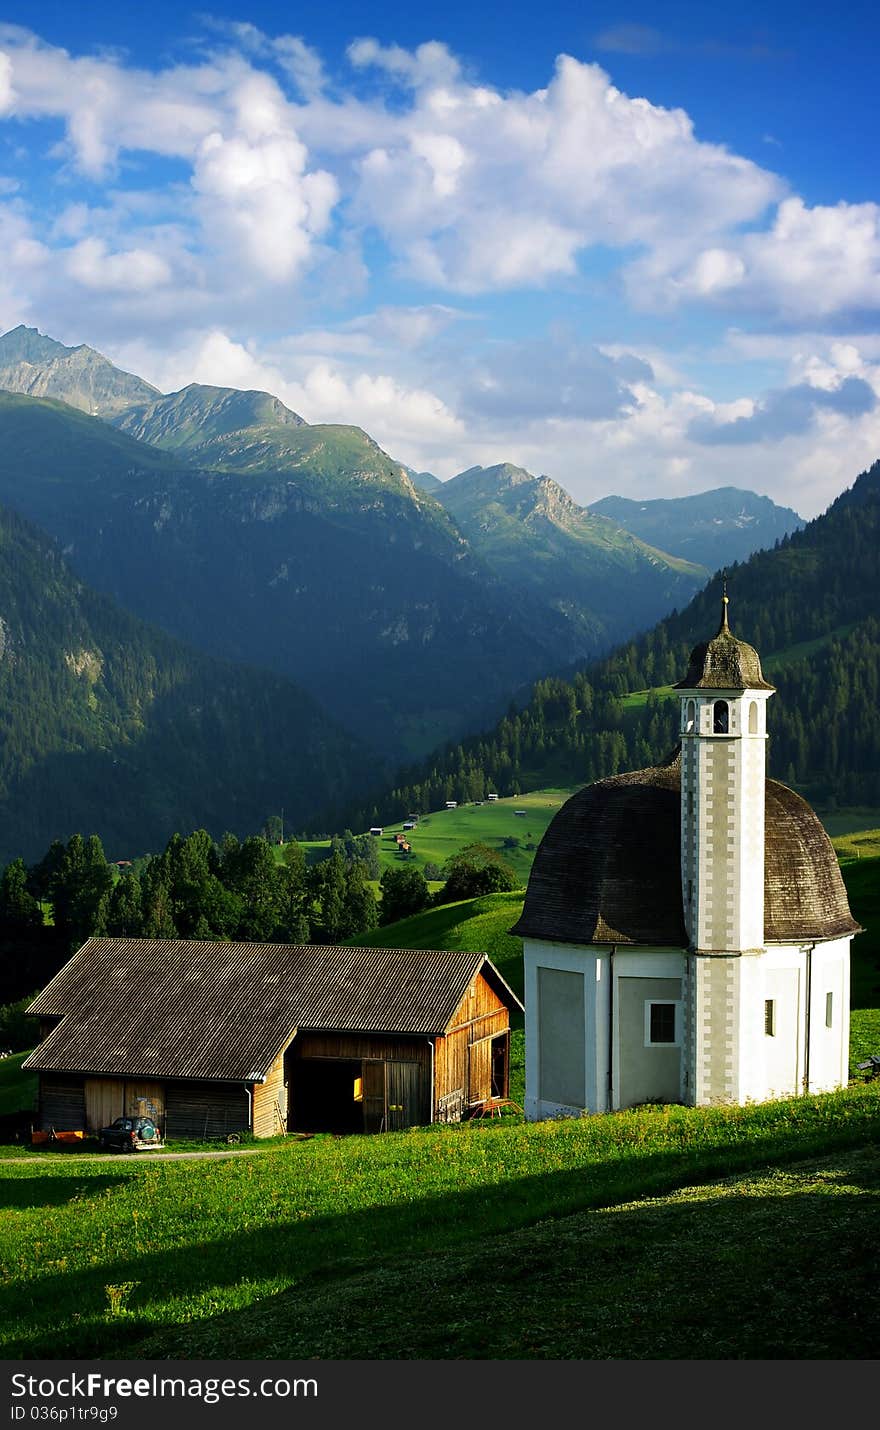 A nice small church in the Swiss Landscape. A nice small church in the Swiss Landscape